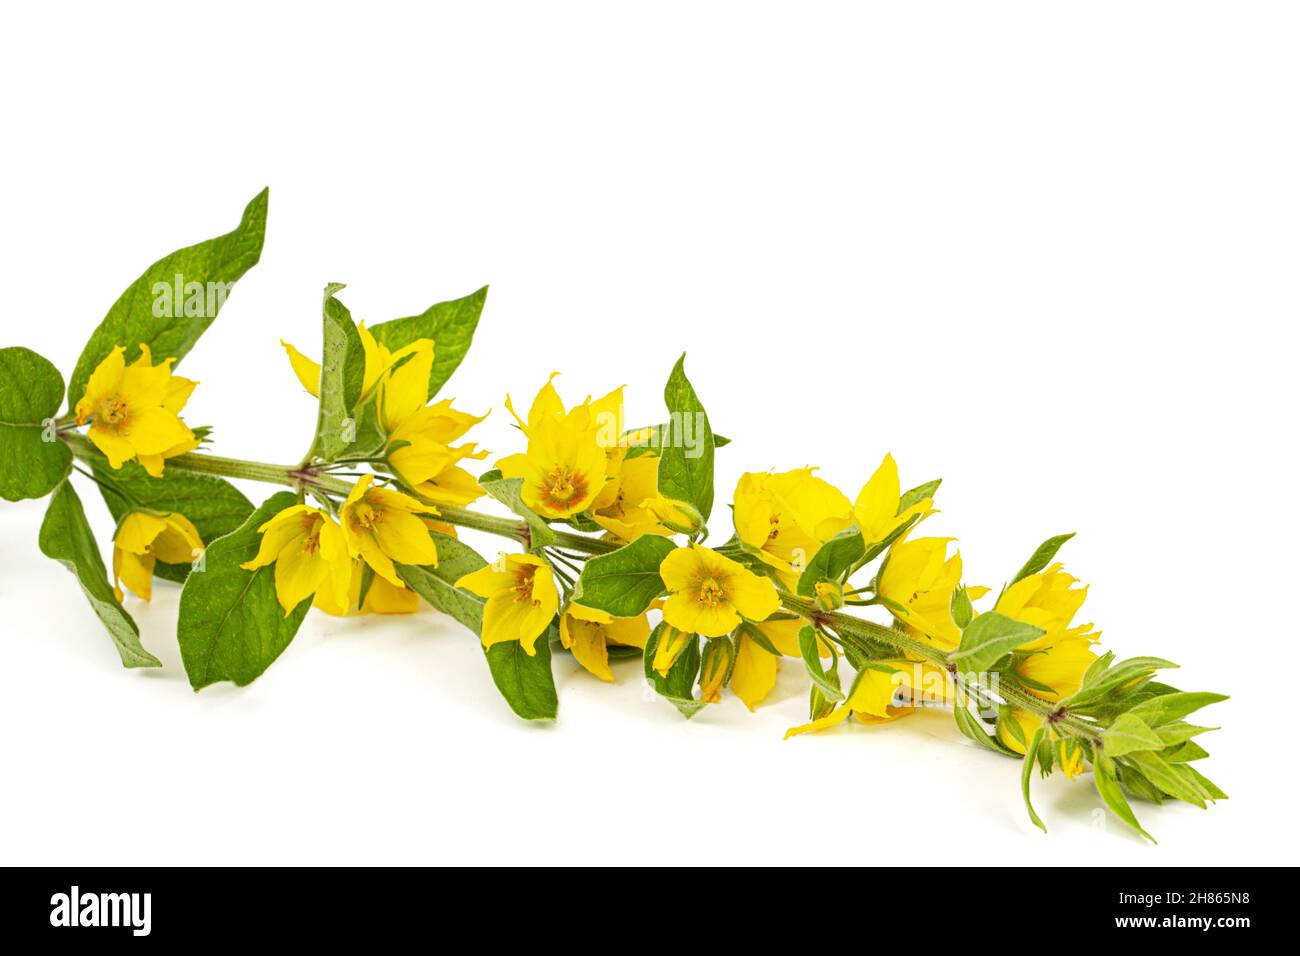 Inflorescence of yellow loosestrife flowers, lat. Lysimachia, isolated on white background Stock Photo